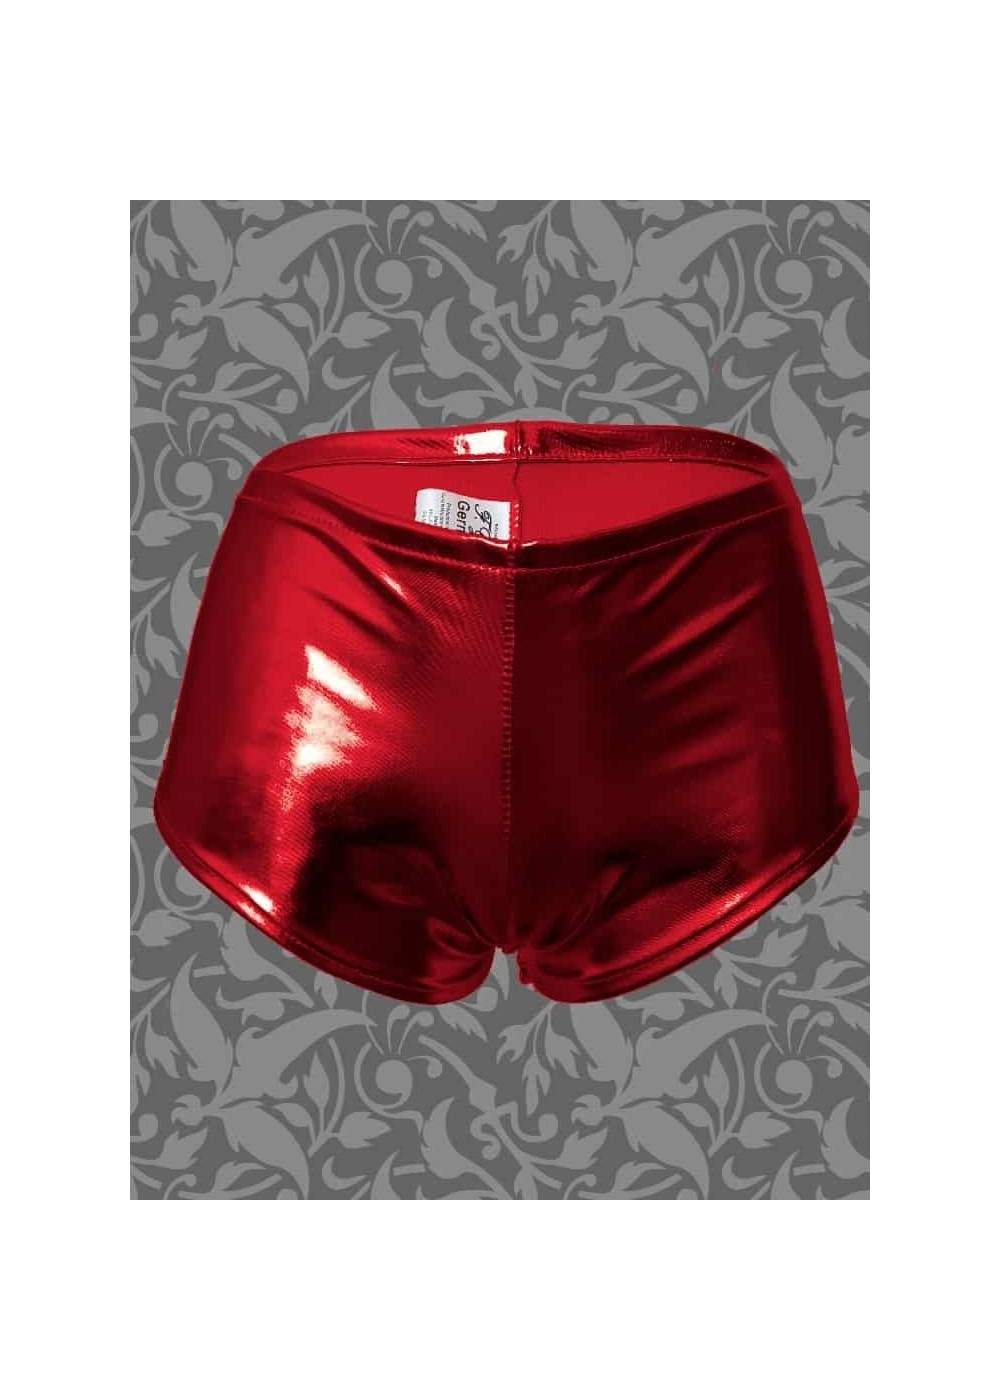 Leather-look hotpants red metallic sizes 34 - 42